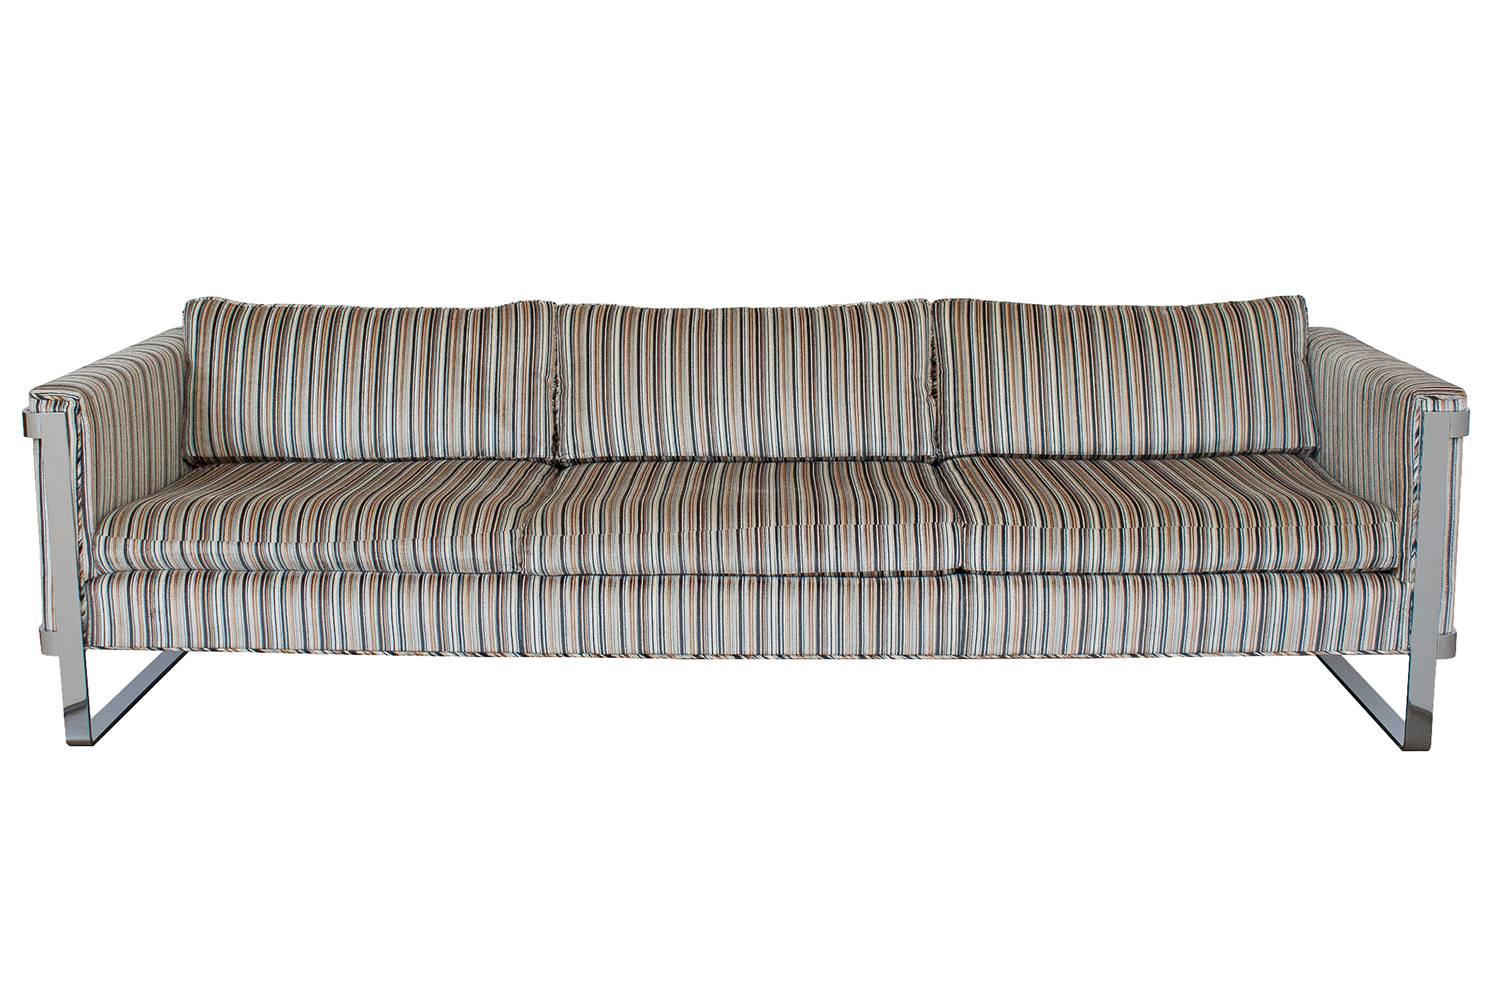 Milo Baughman chrome flat bar sofa in the original striped velvet upholstery. Upholstered three-seat sofa is cradled and floats within chrome-plated steel legs and exposed sides. 1.75" chrome-plated steel. Loose cushion seats and backs.